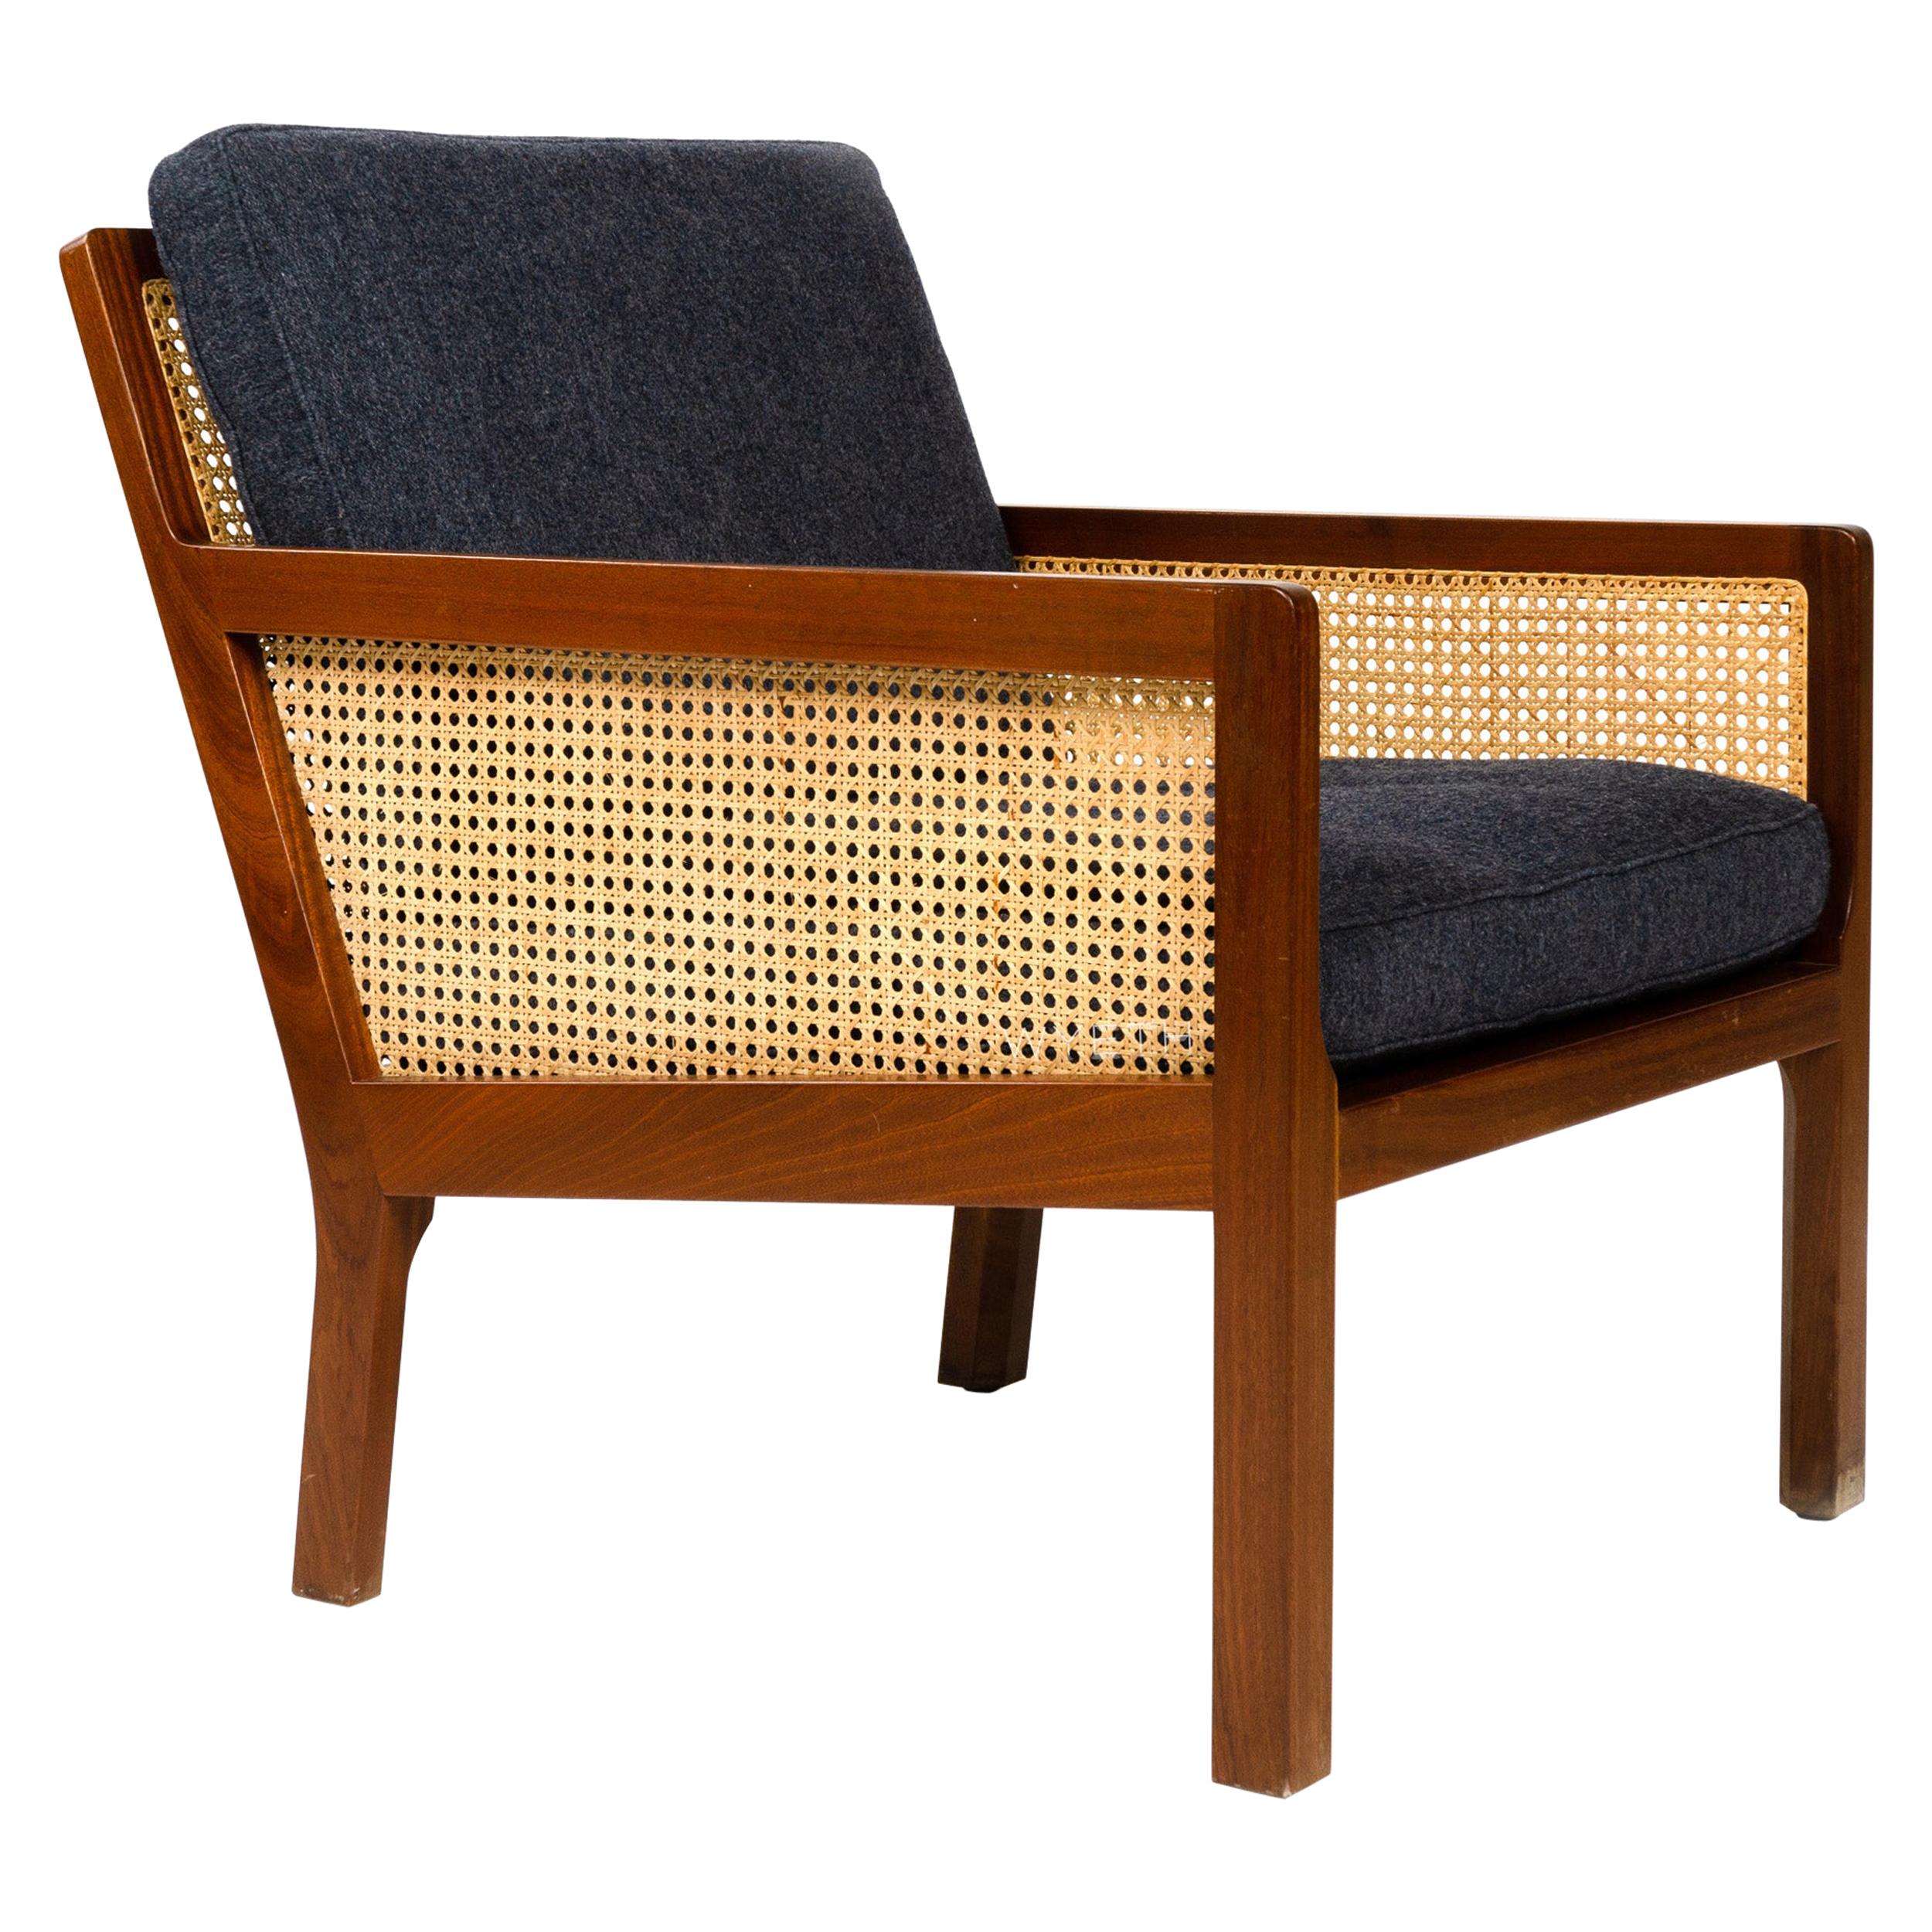 1960s Mahogany & Cane Lounge Chair by Bernt Petersen for Worts Mobelsnedkeri For Sale